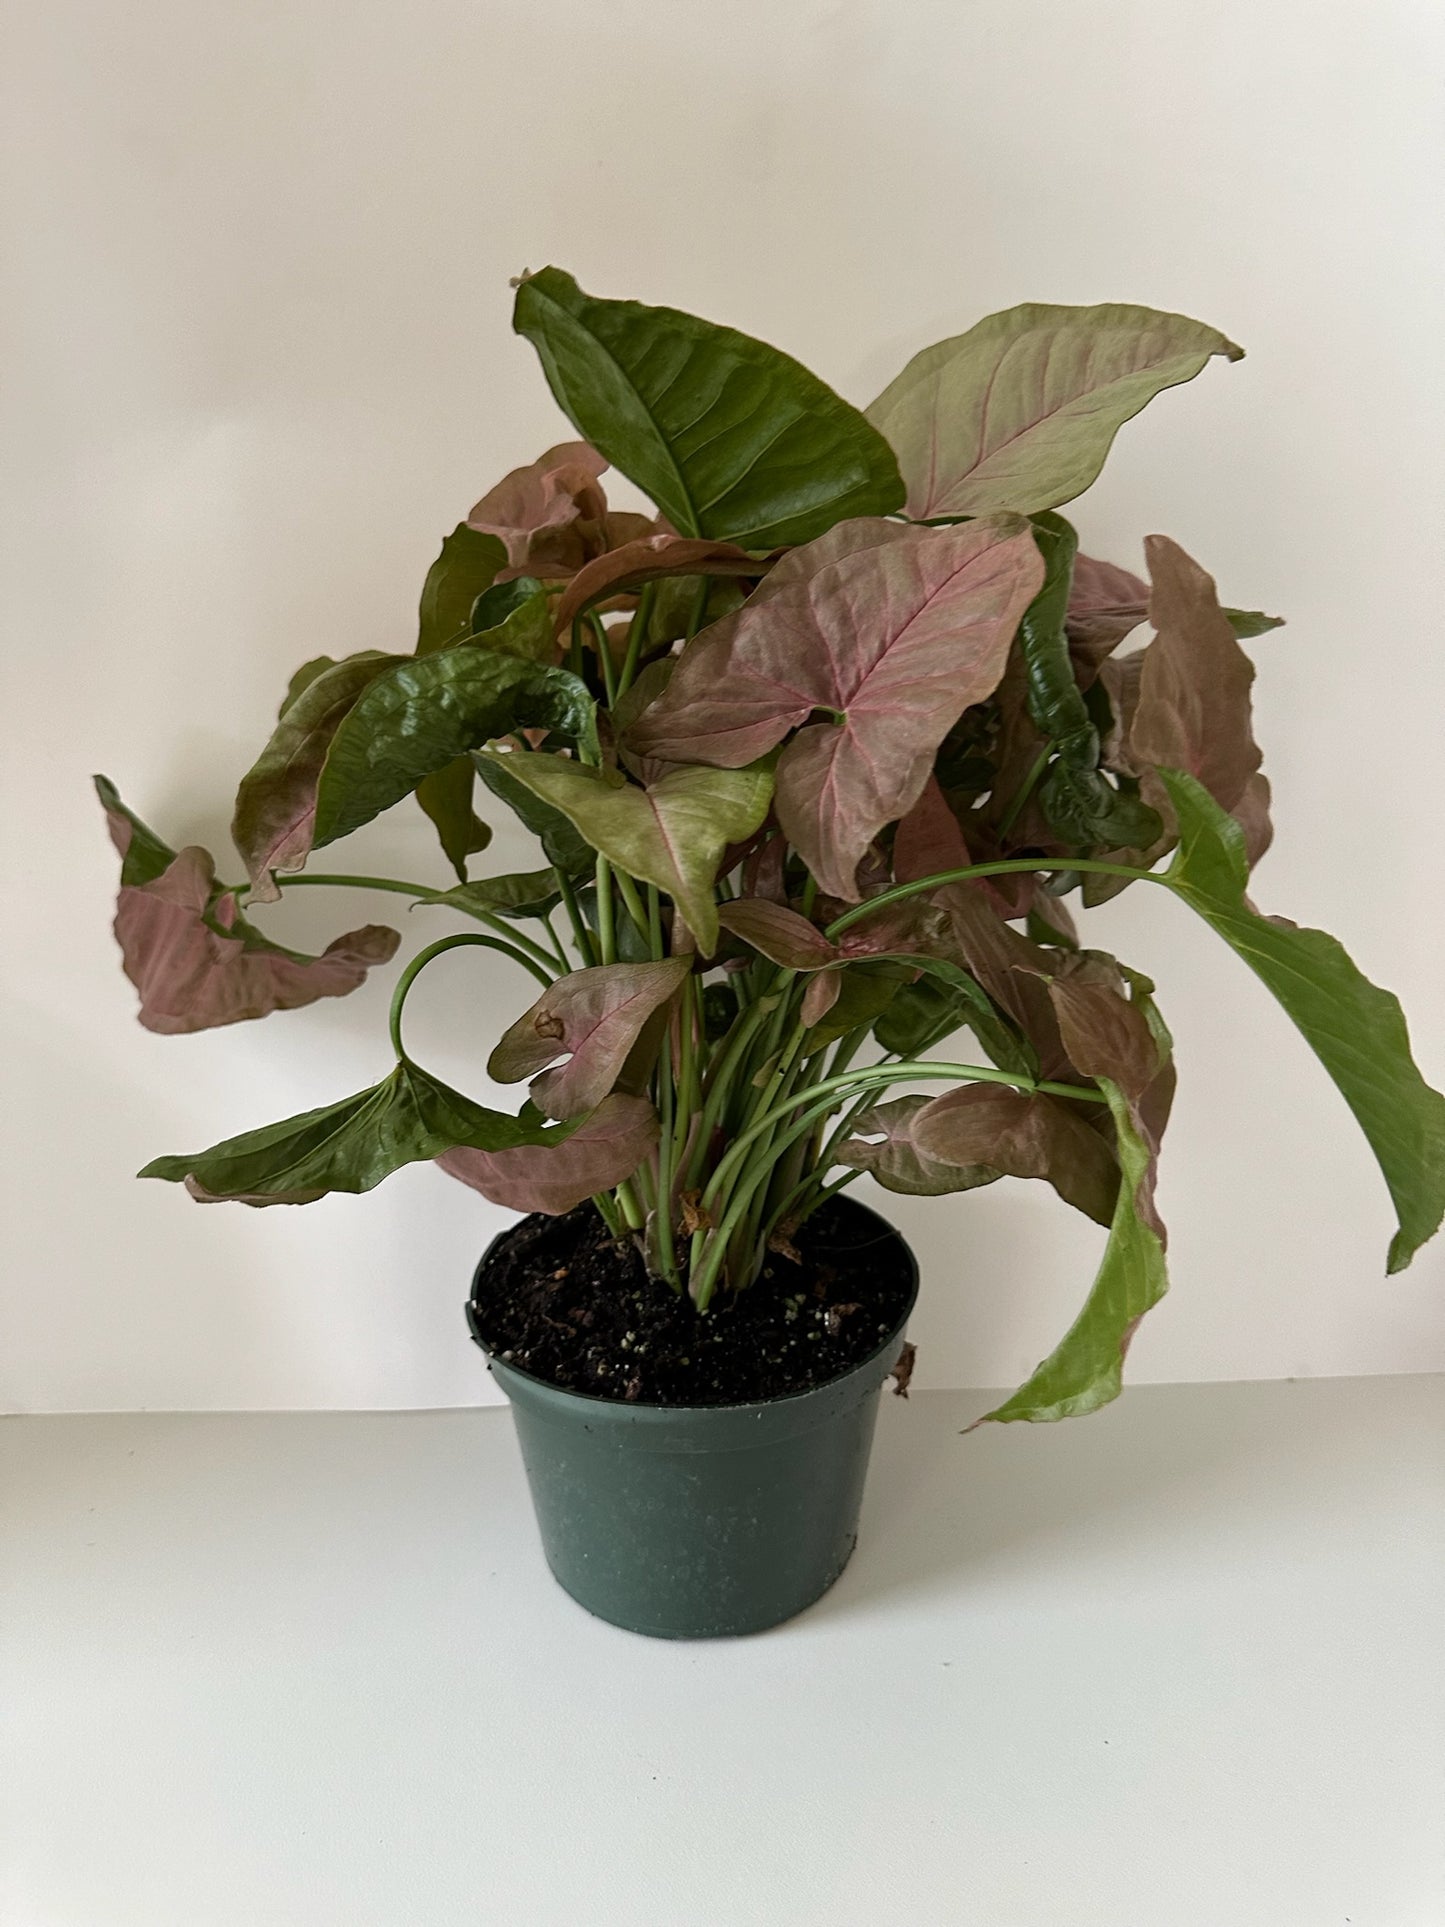 Syngonium Podophyllum 'Strawberry' -  Pink Colored Leaves, Low Maintenance - Tropical Houseplant